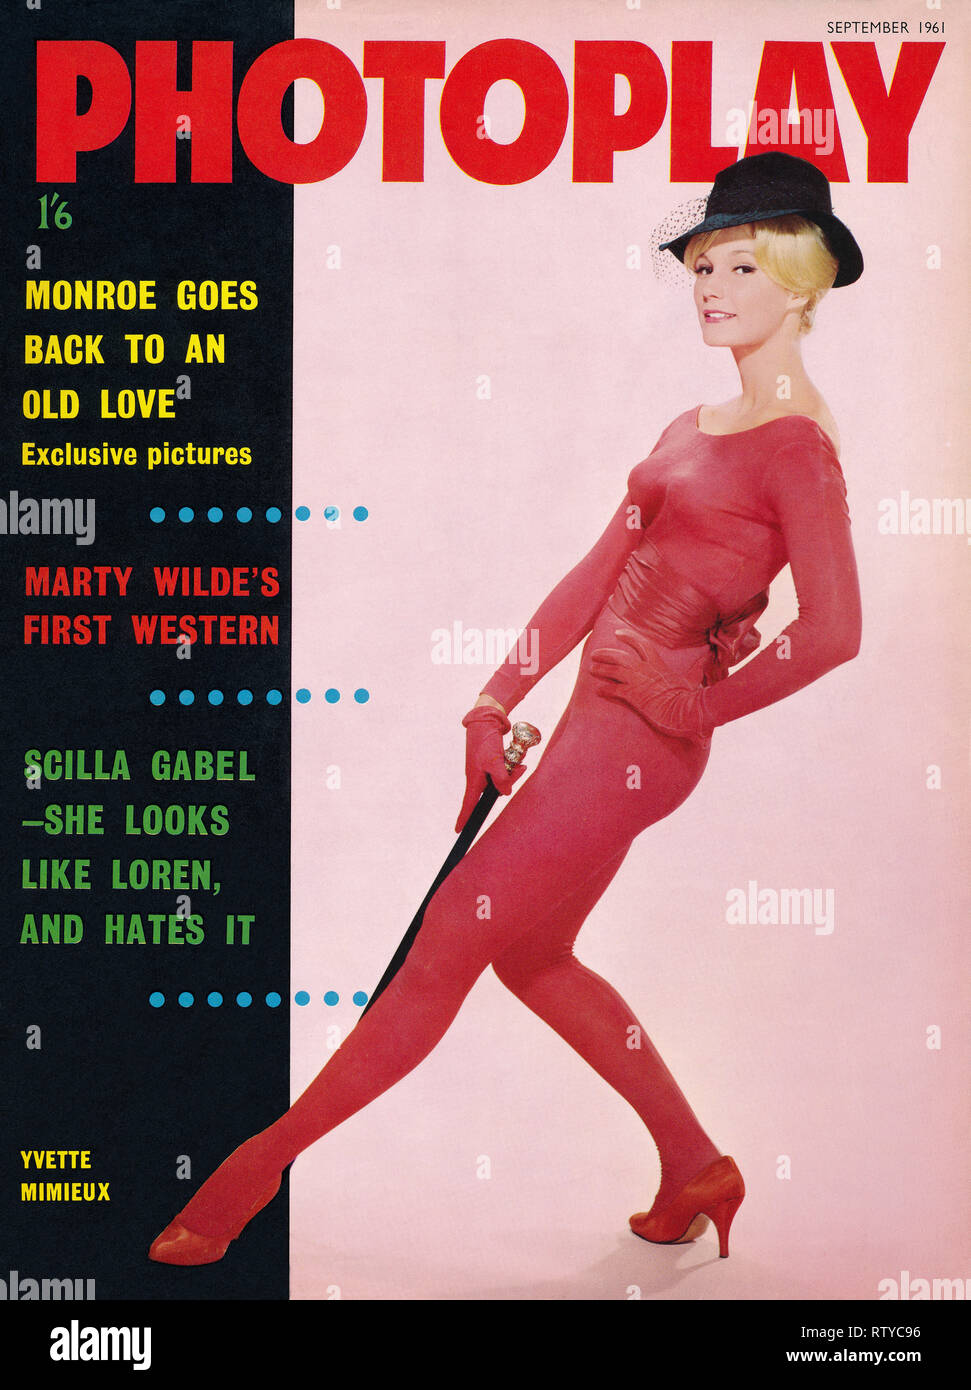 1961 vintage cover of British Photoplay magazine, featuring actress Yvette Mimieux. Stock Photo